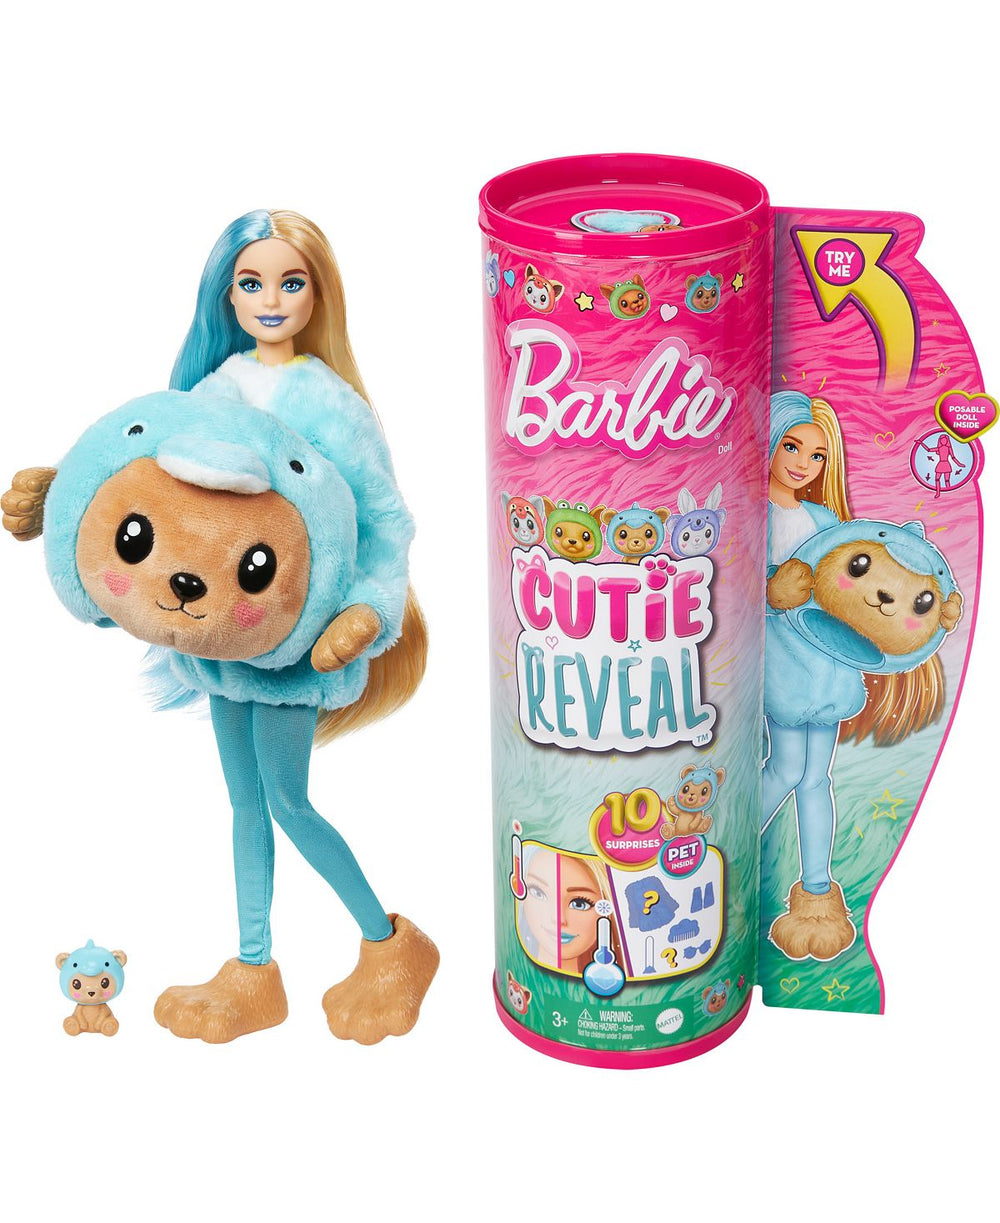 Barbie Cutie Reveal Costume-Themed Series Doll and Accessories with 10 Surprises, Teddy Bear as Dolphin